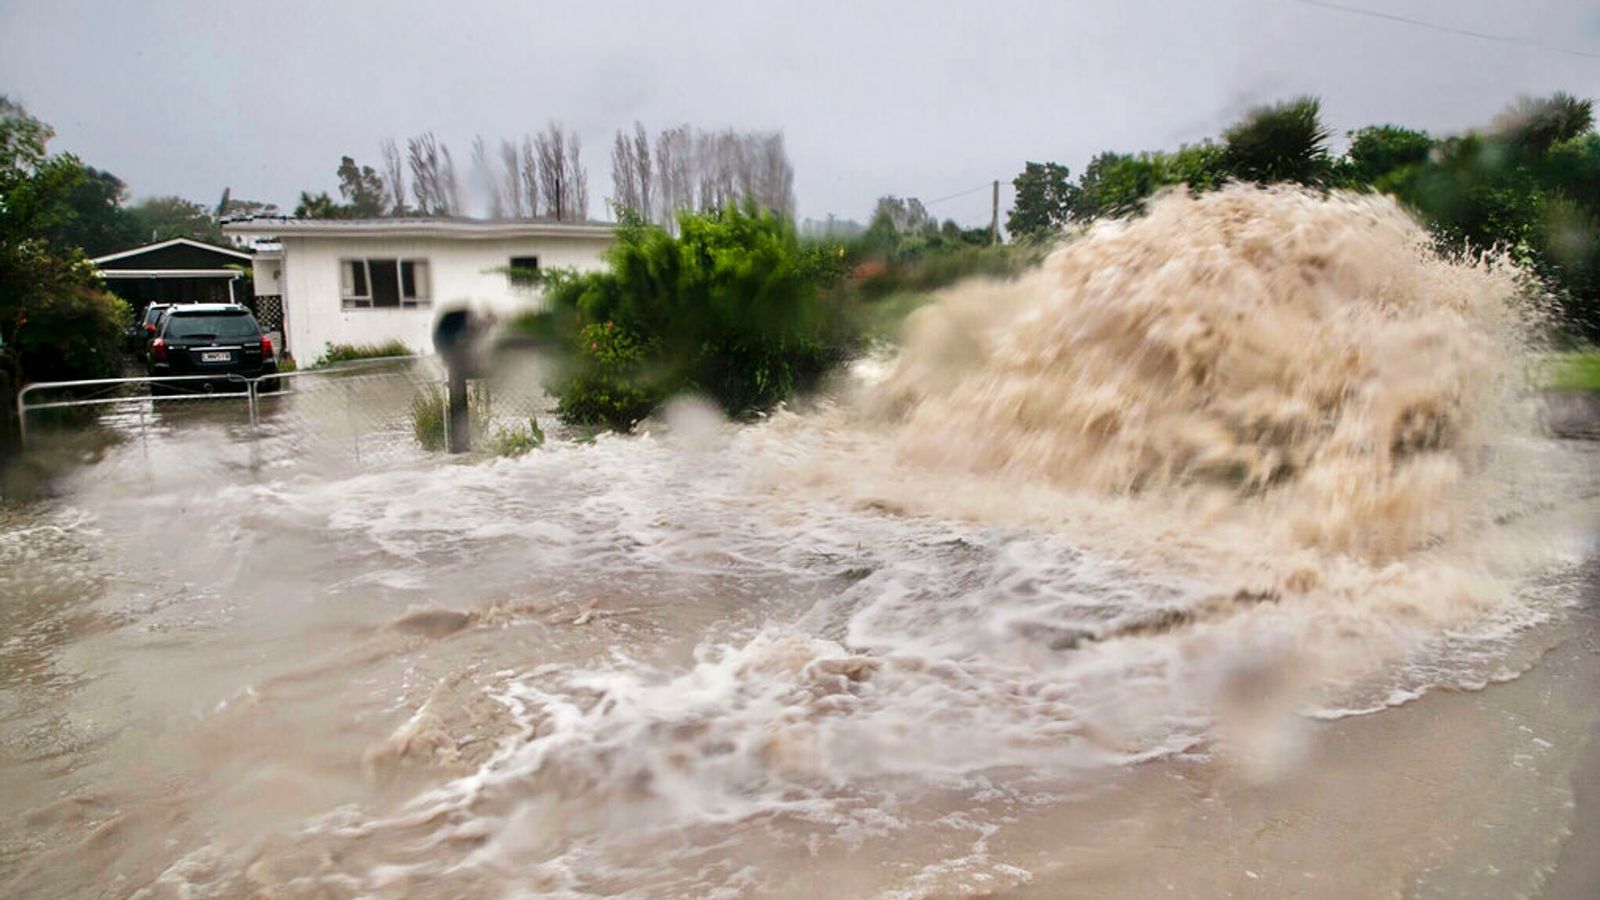 New Zealand declares national state of emergency after Cyclone Gabrielle causes major damage